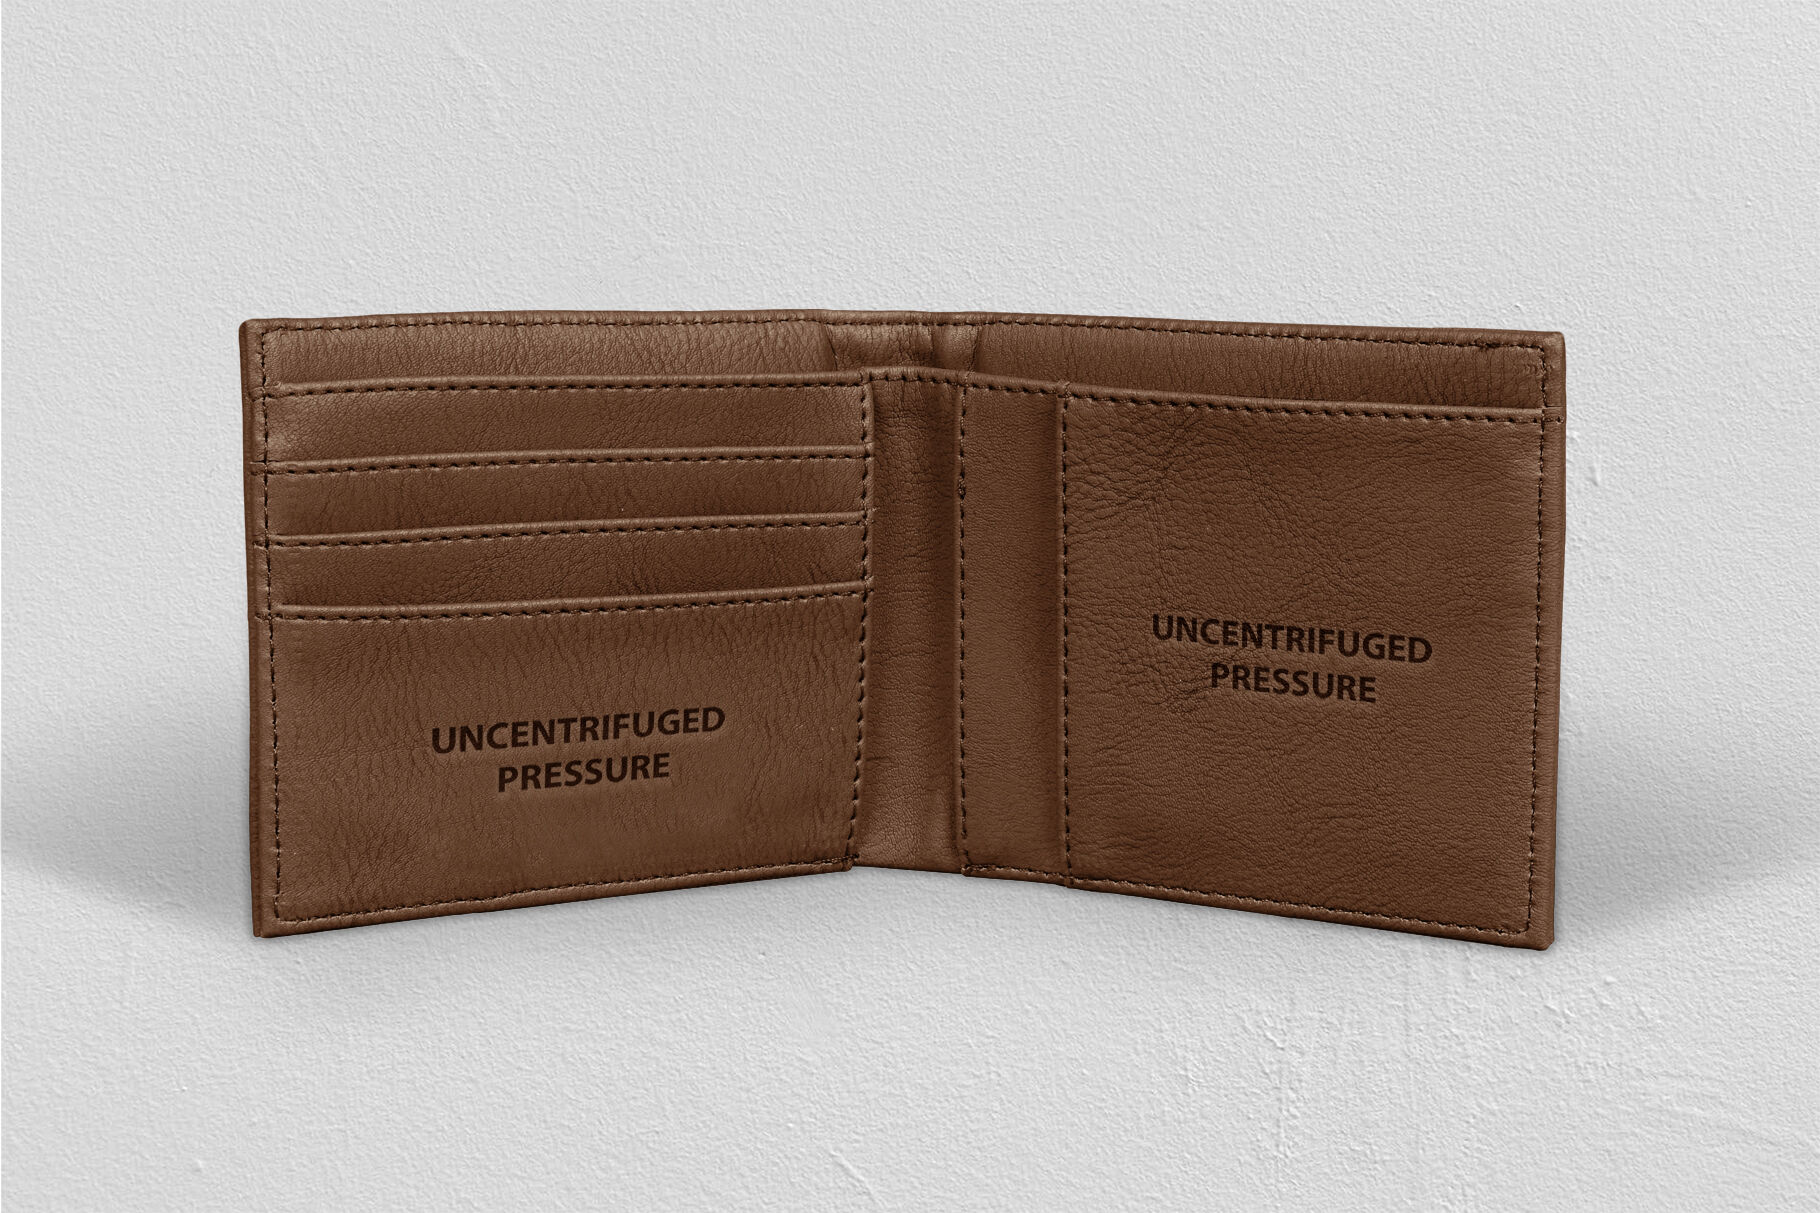 Download Leather Wallet Mockup By Uncentrifuged Pressure | TheHungryJPEG.com